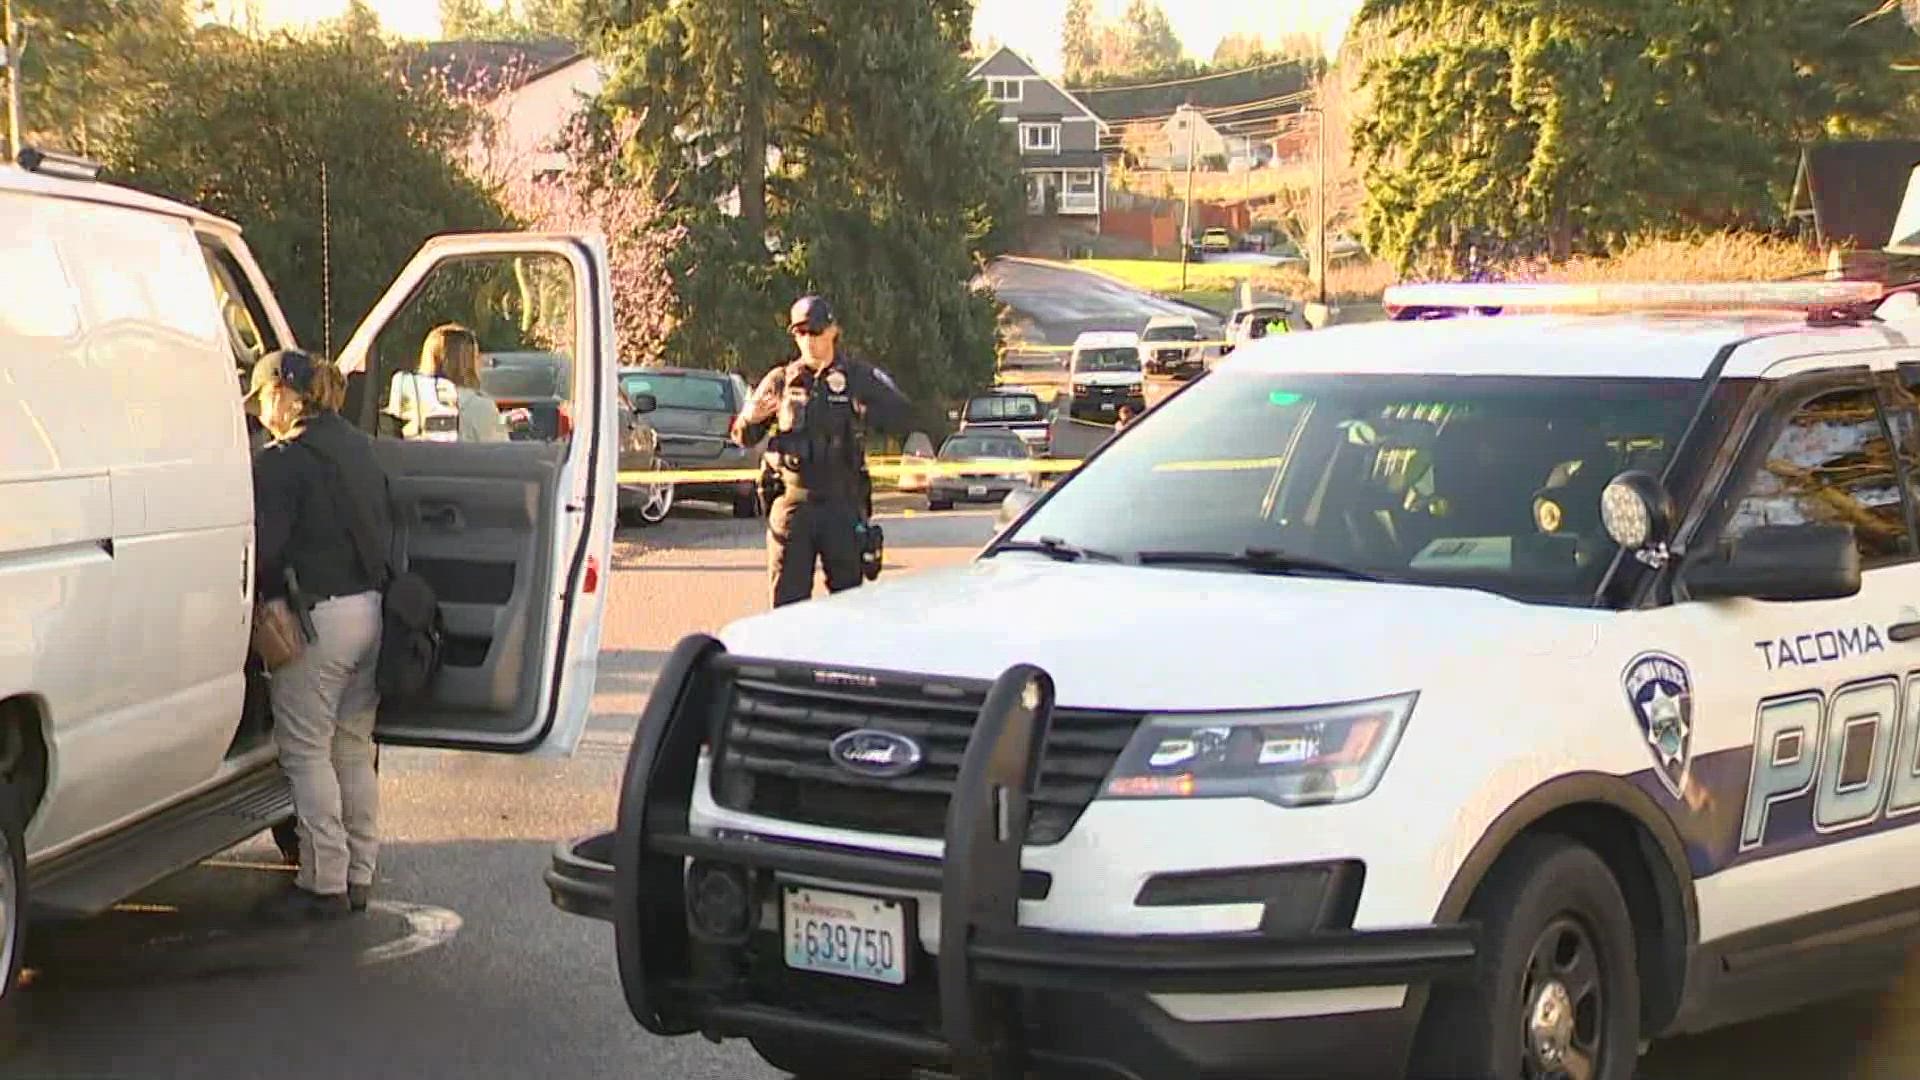 Police are investigating an early morning shooting that left a man injured and a woman dead in Tacoma, according to the Tacoma Police Department.